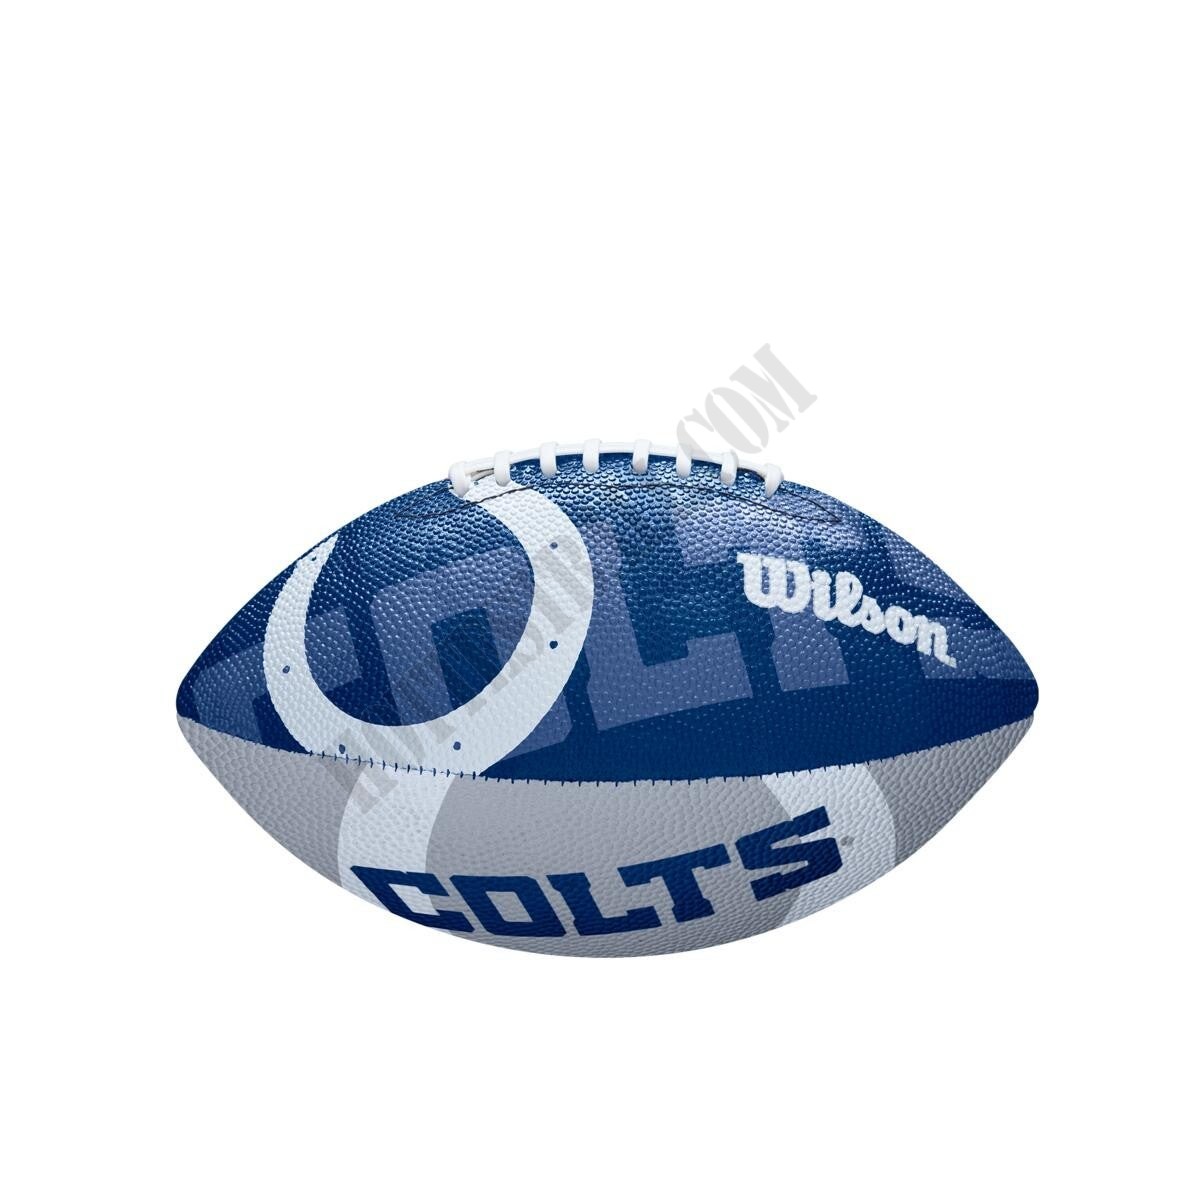 NFL Team Tailgate Football - Indianapolis Colts ● Wilson Promotions - -0